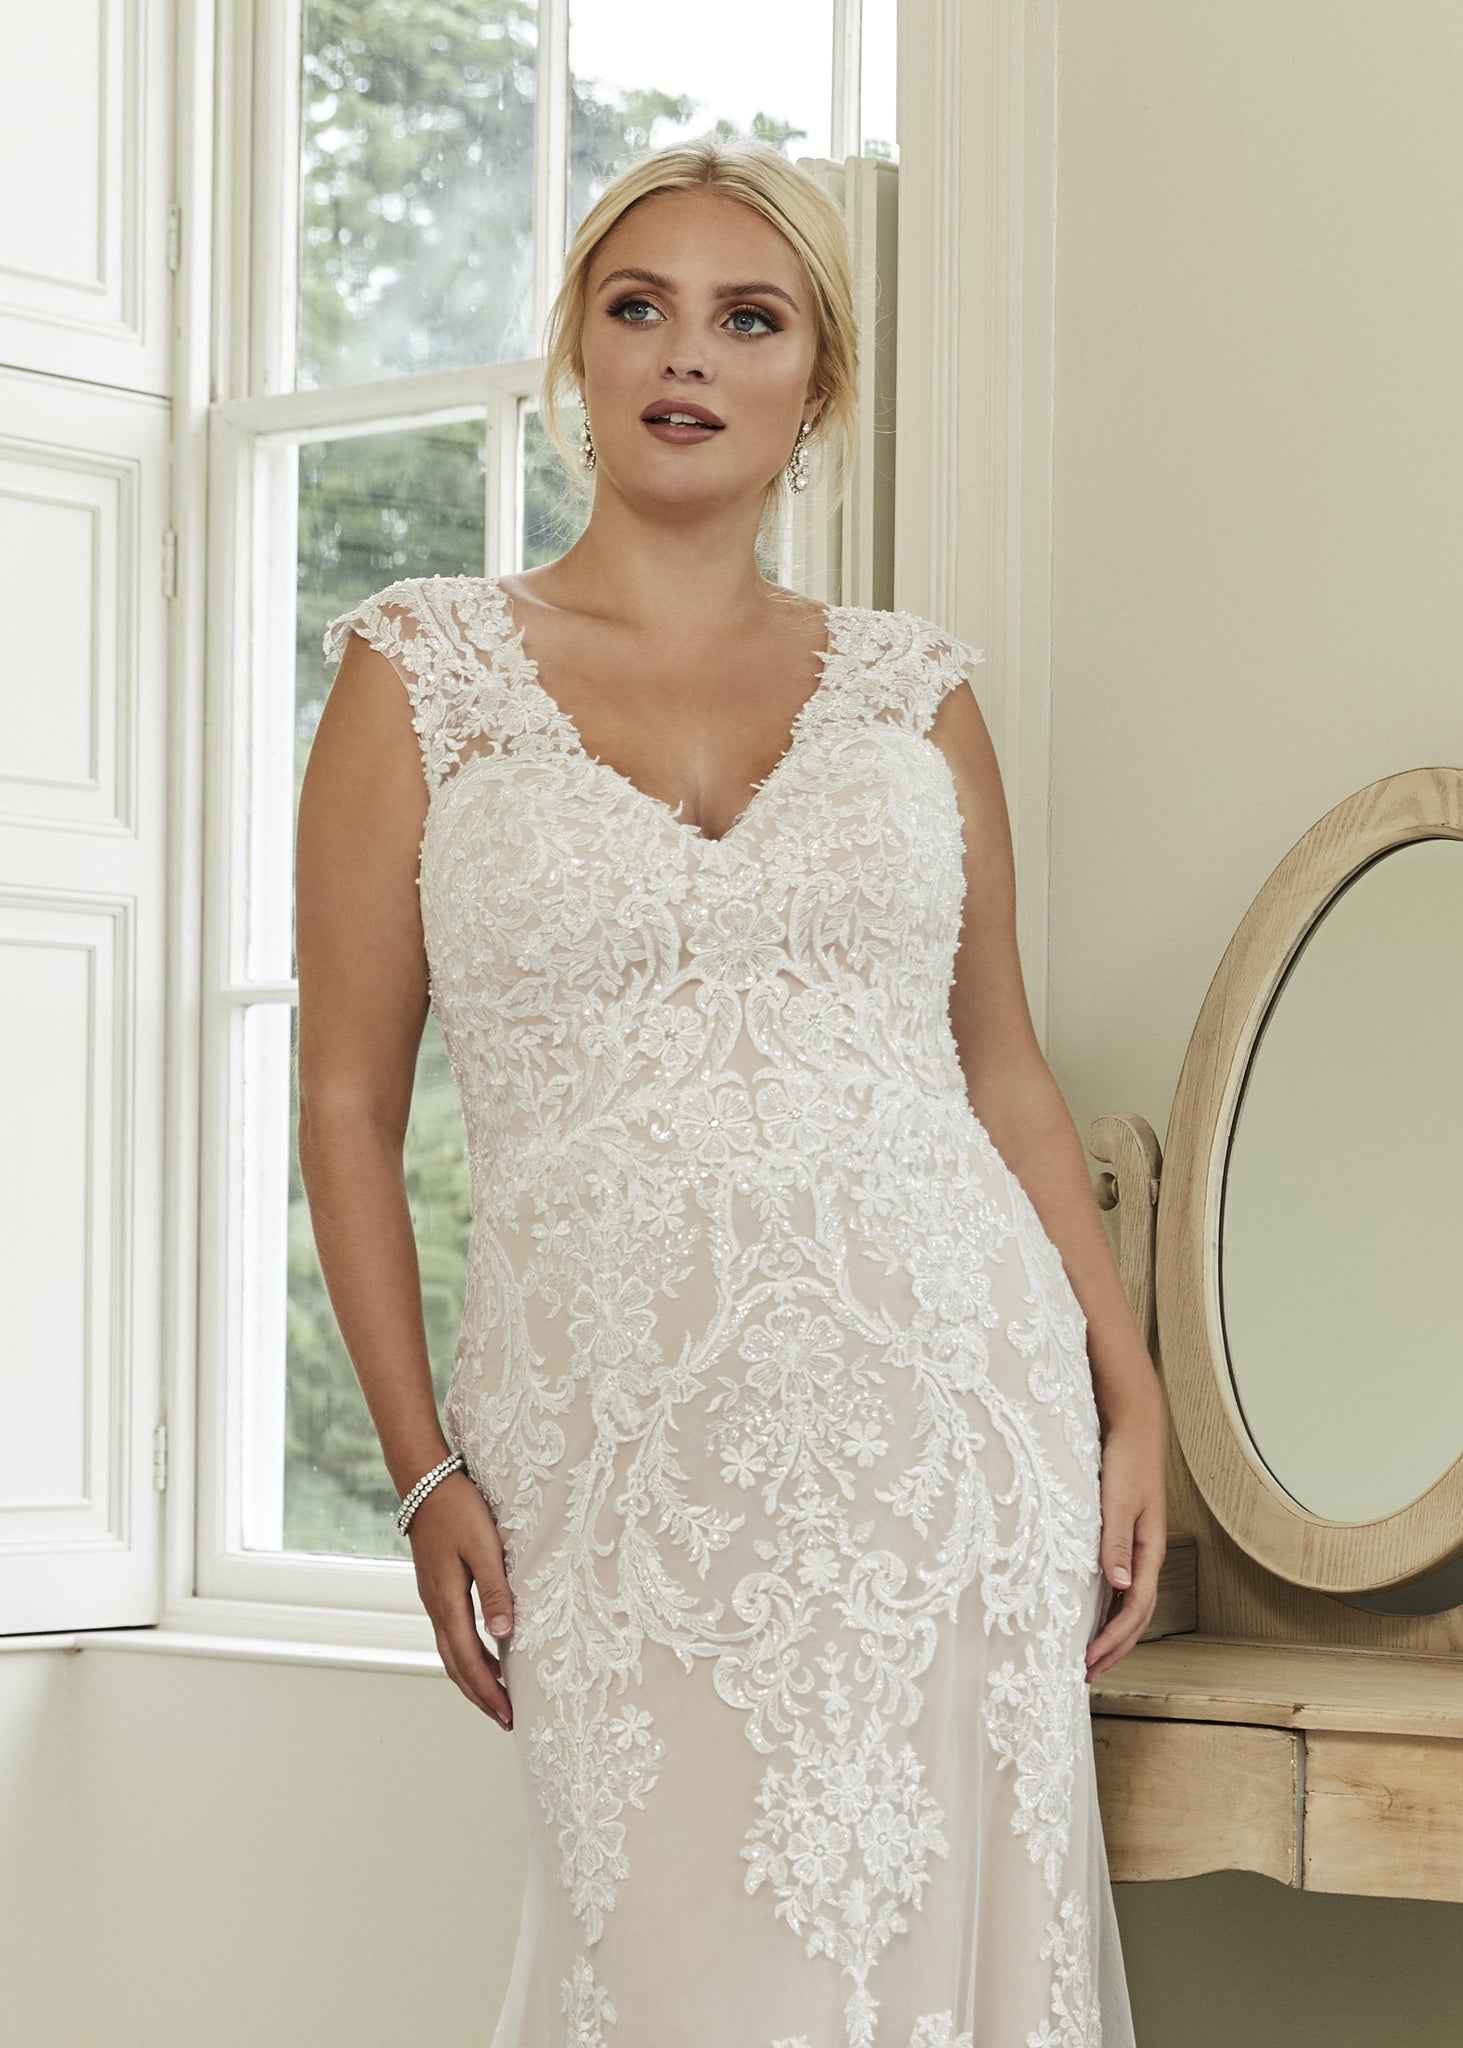 UK20 LisaMarie - Adore Bridal and Occasion Wear